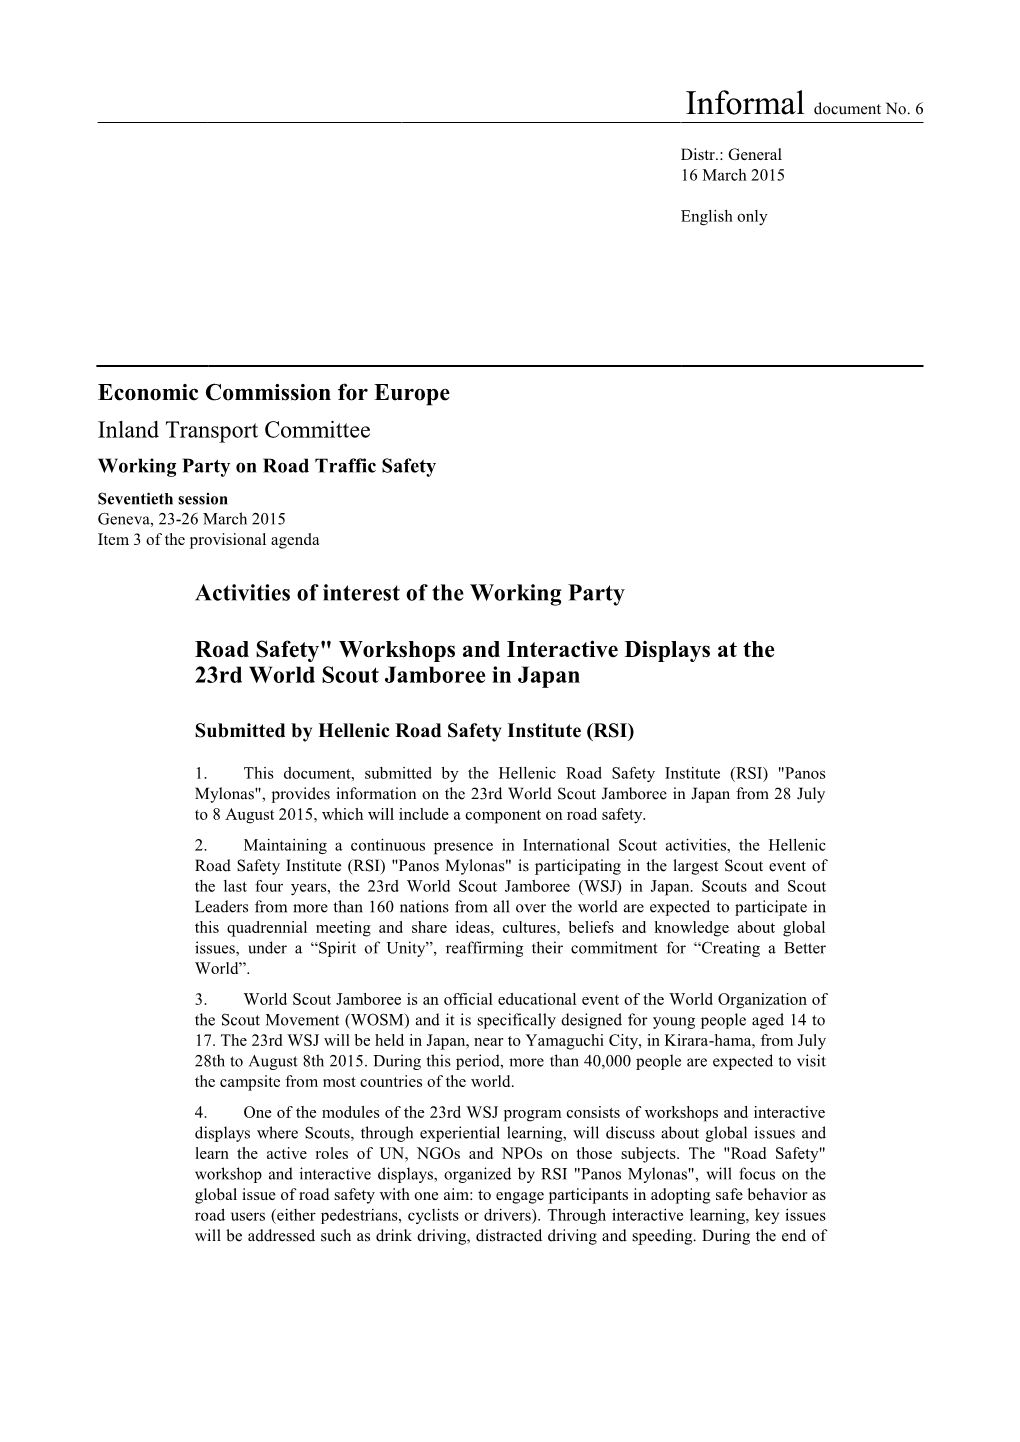 United Nations (UN) ECOSOC Consultative Status, Is an Active Member of the European Transport Safety Council (ETSC) and a National Safety Committee Member